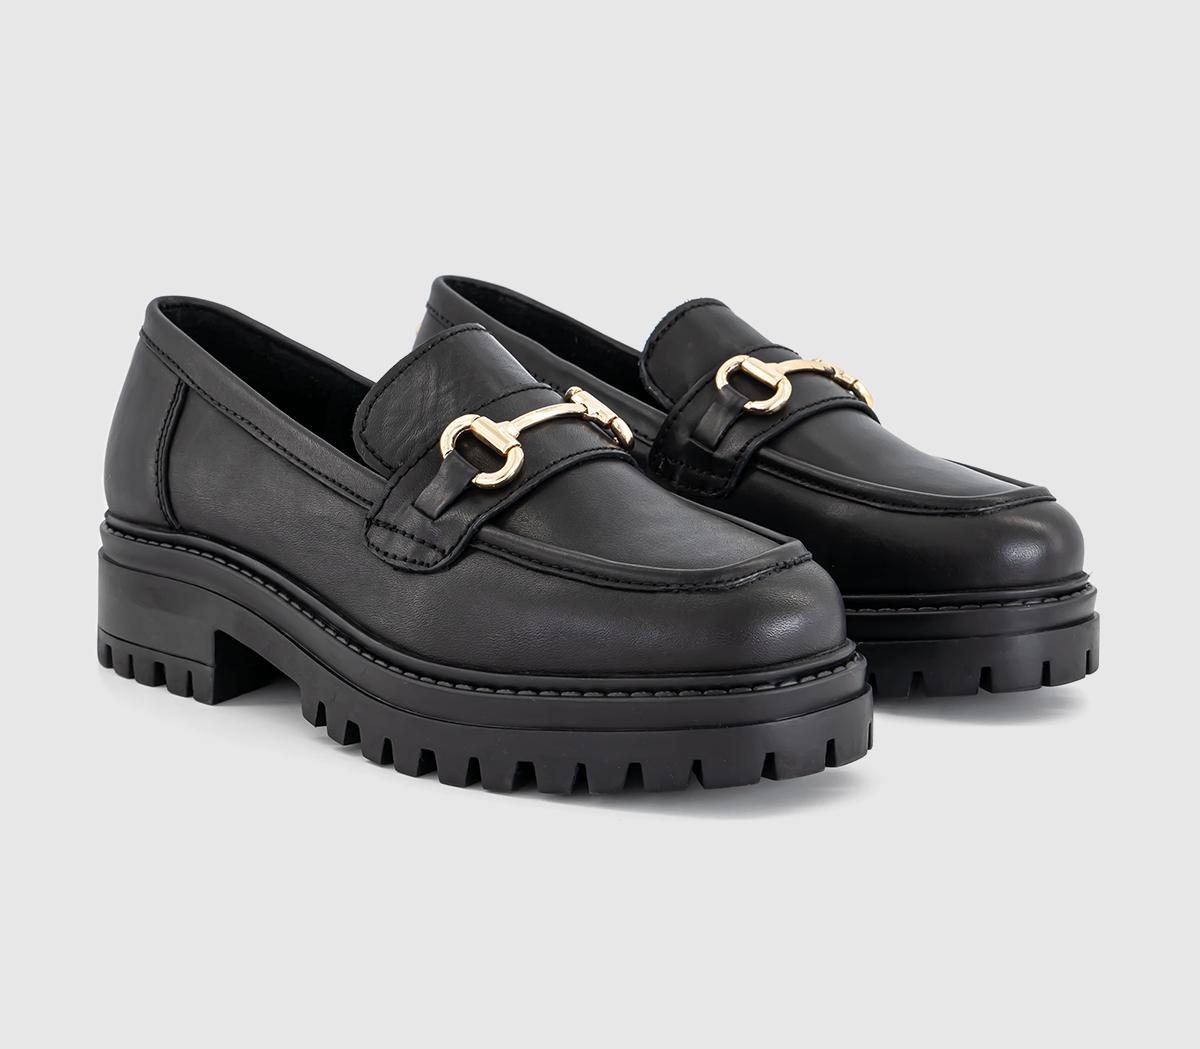 OFFICE Womens Fairhope Chunky Snaffle Trim Loafers Black Leather, 4